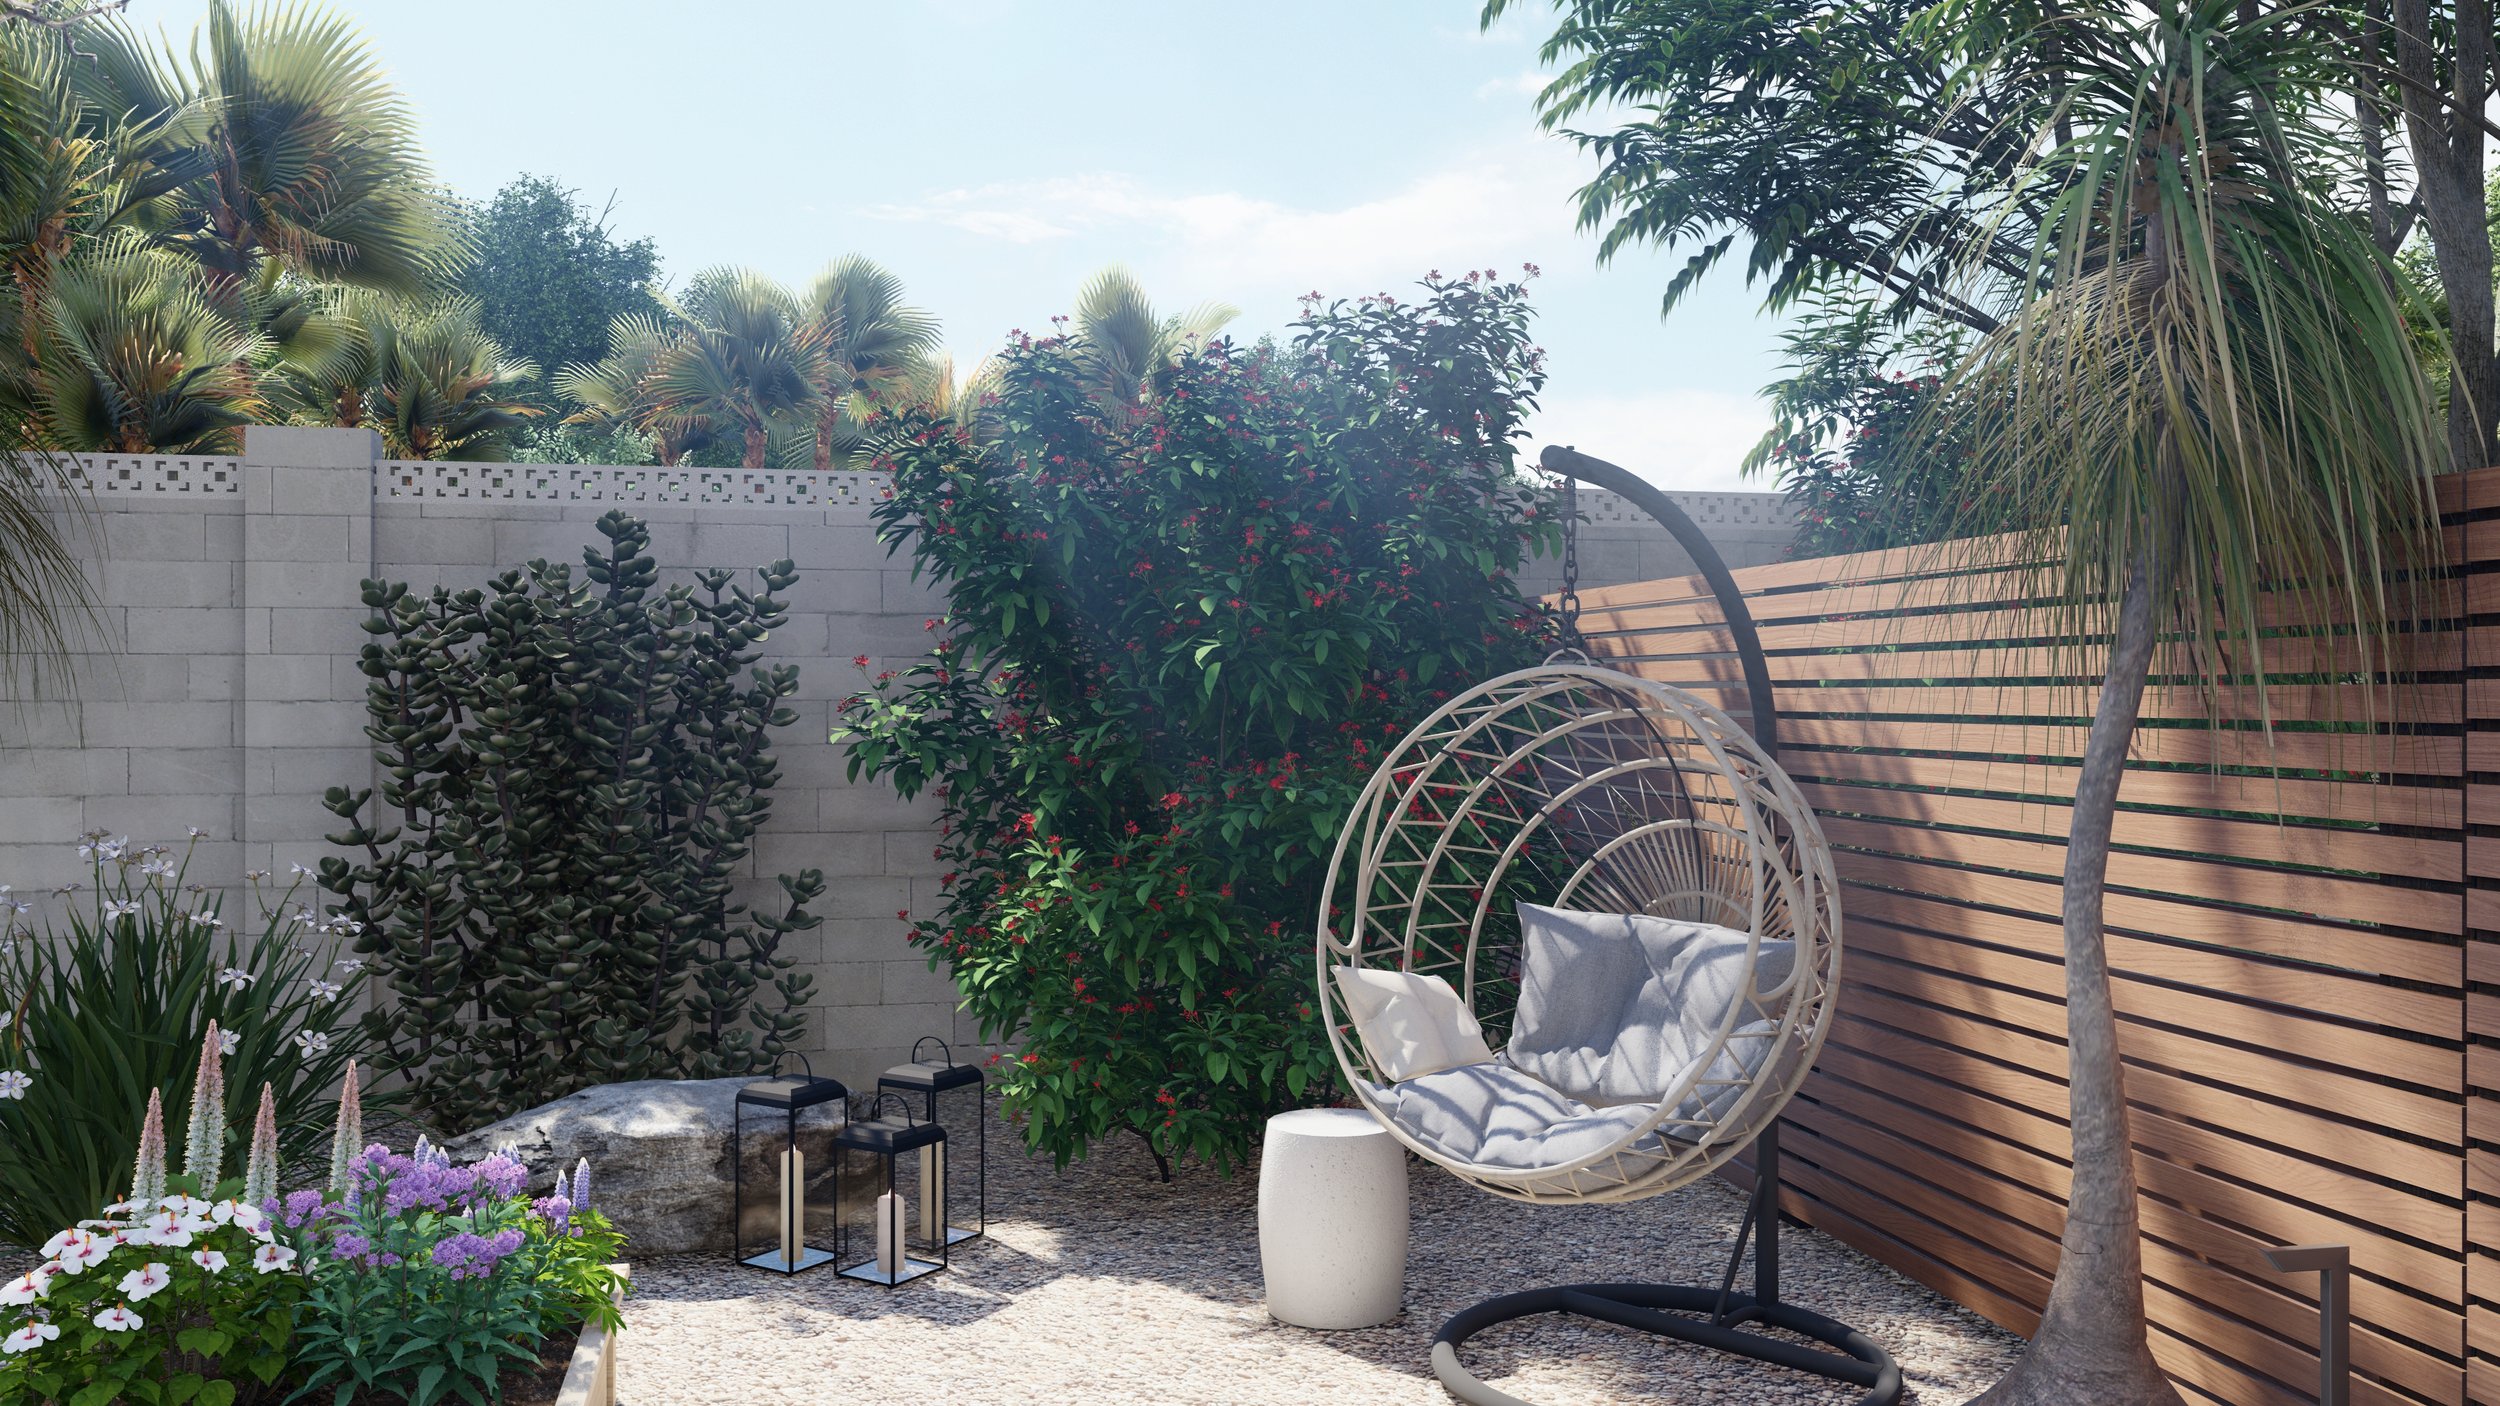 A hanging chair is the perfect standalone seat to use in tucked-away spots for relaxation and taking in views, like in this backyard design for a Yardaen client in Scottsdale, AZ.